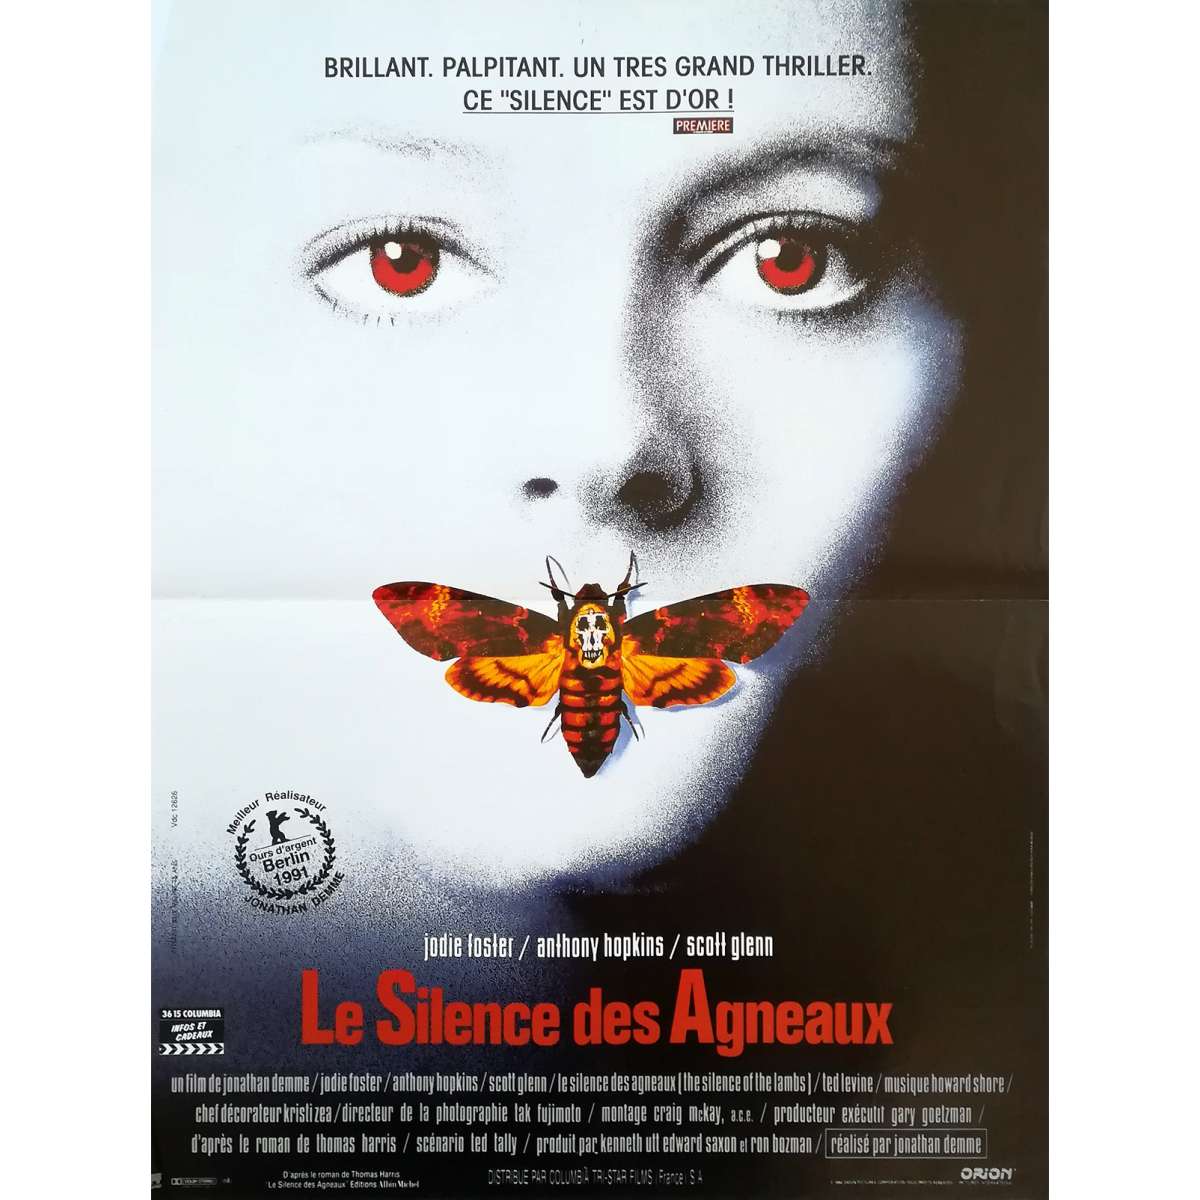 THE SILENCE OF THE LAMBS Movie Poster 15x21 in.